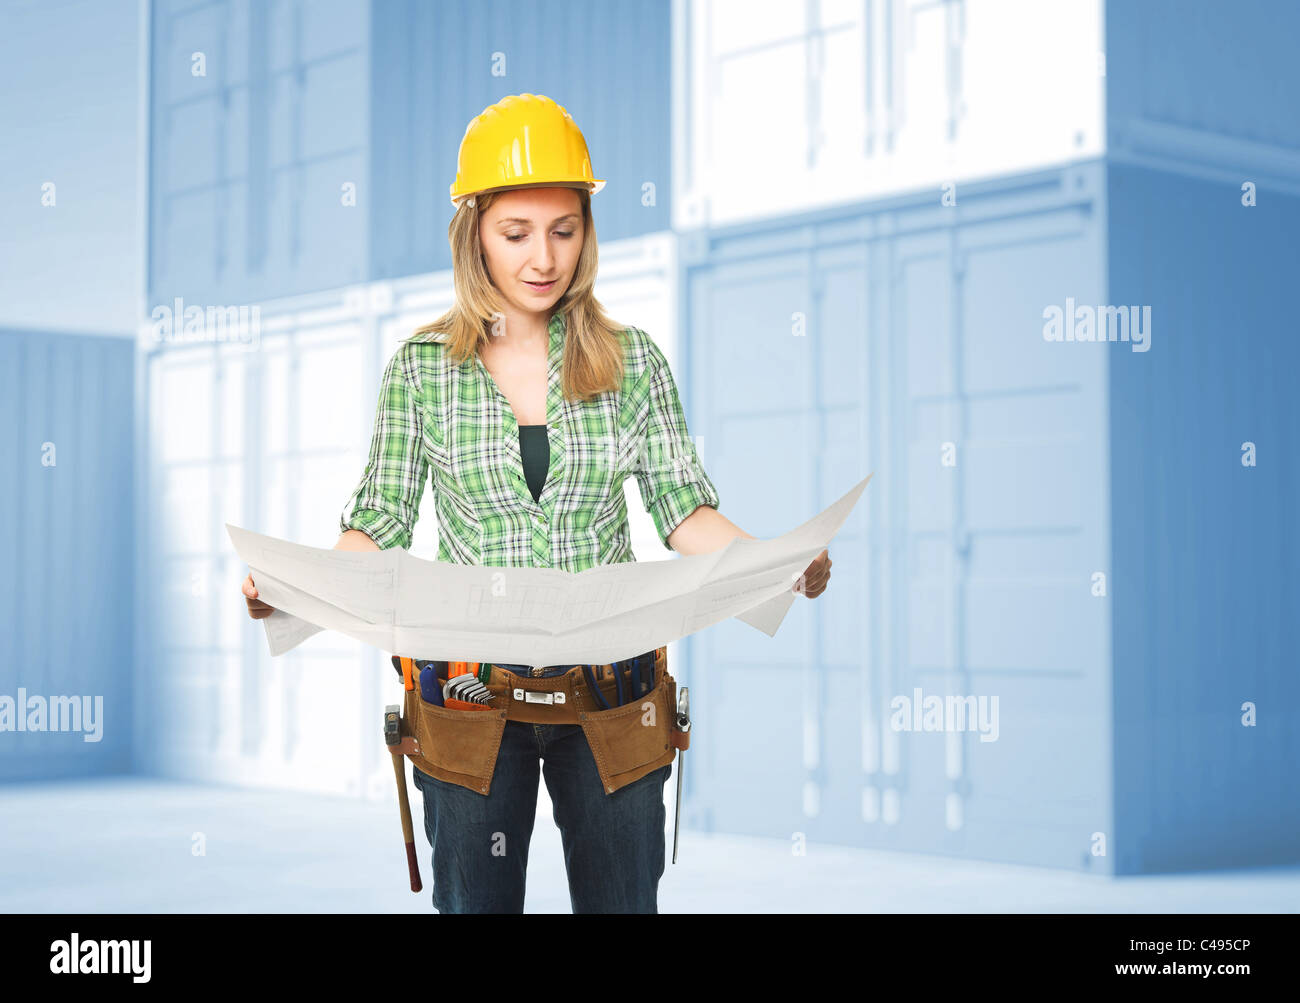 standing woman at work and 3d background Stock Photo